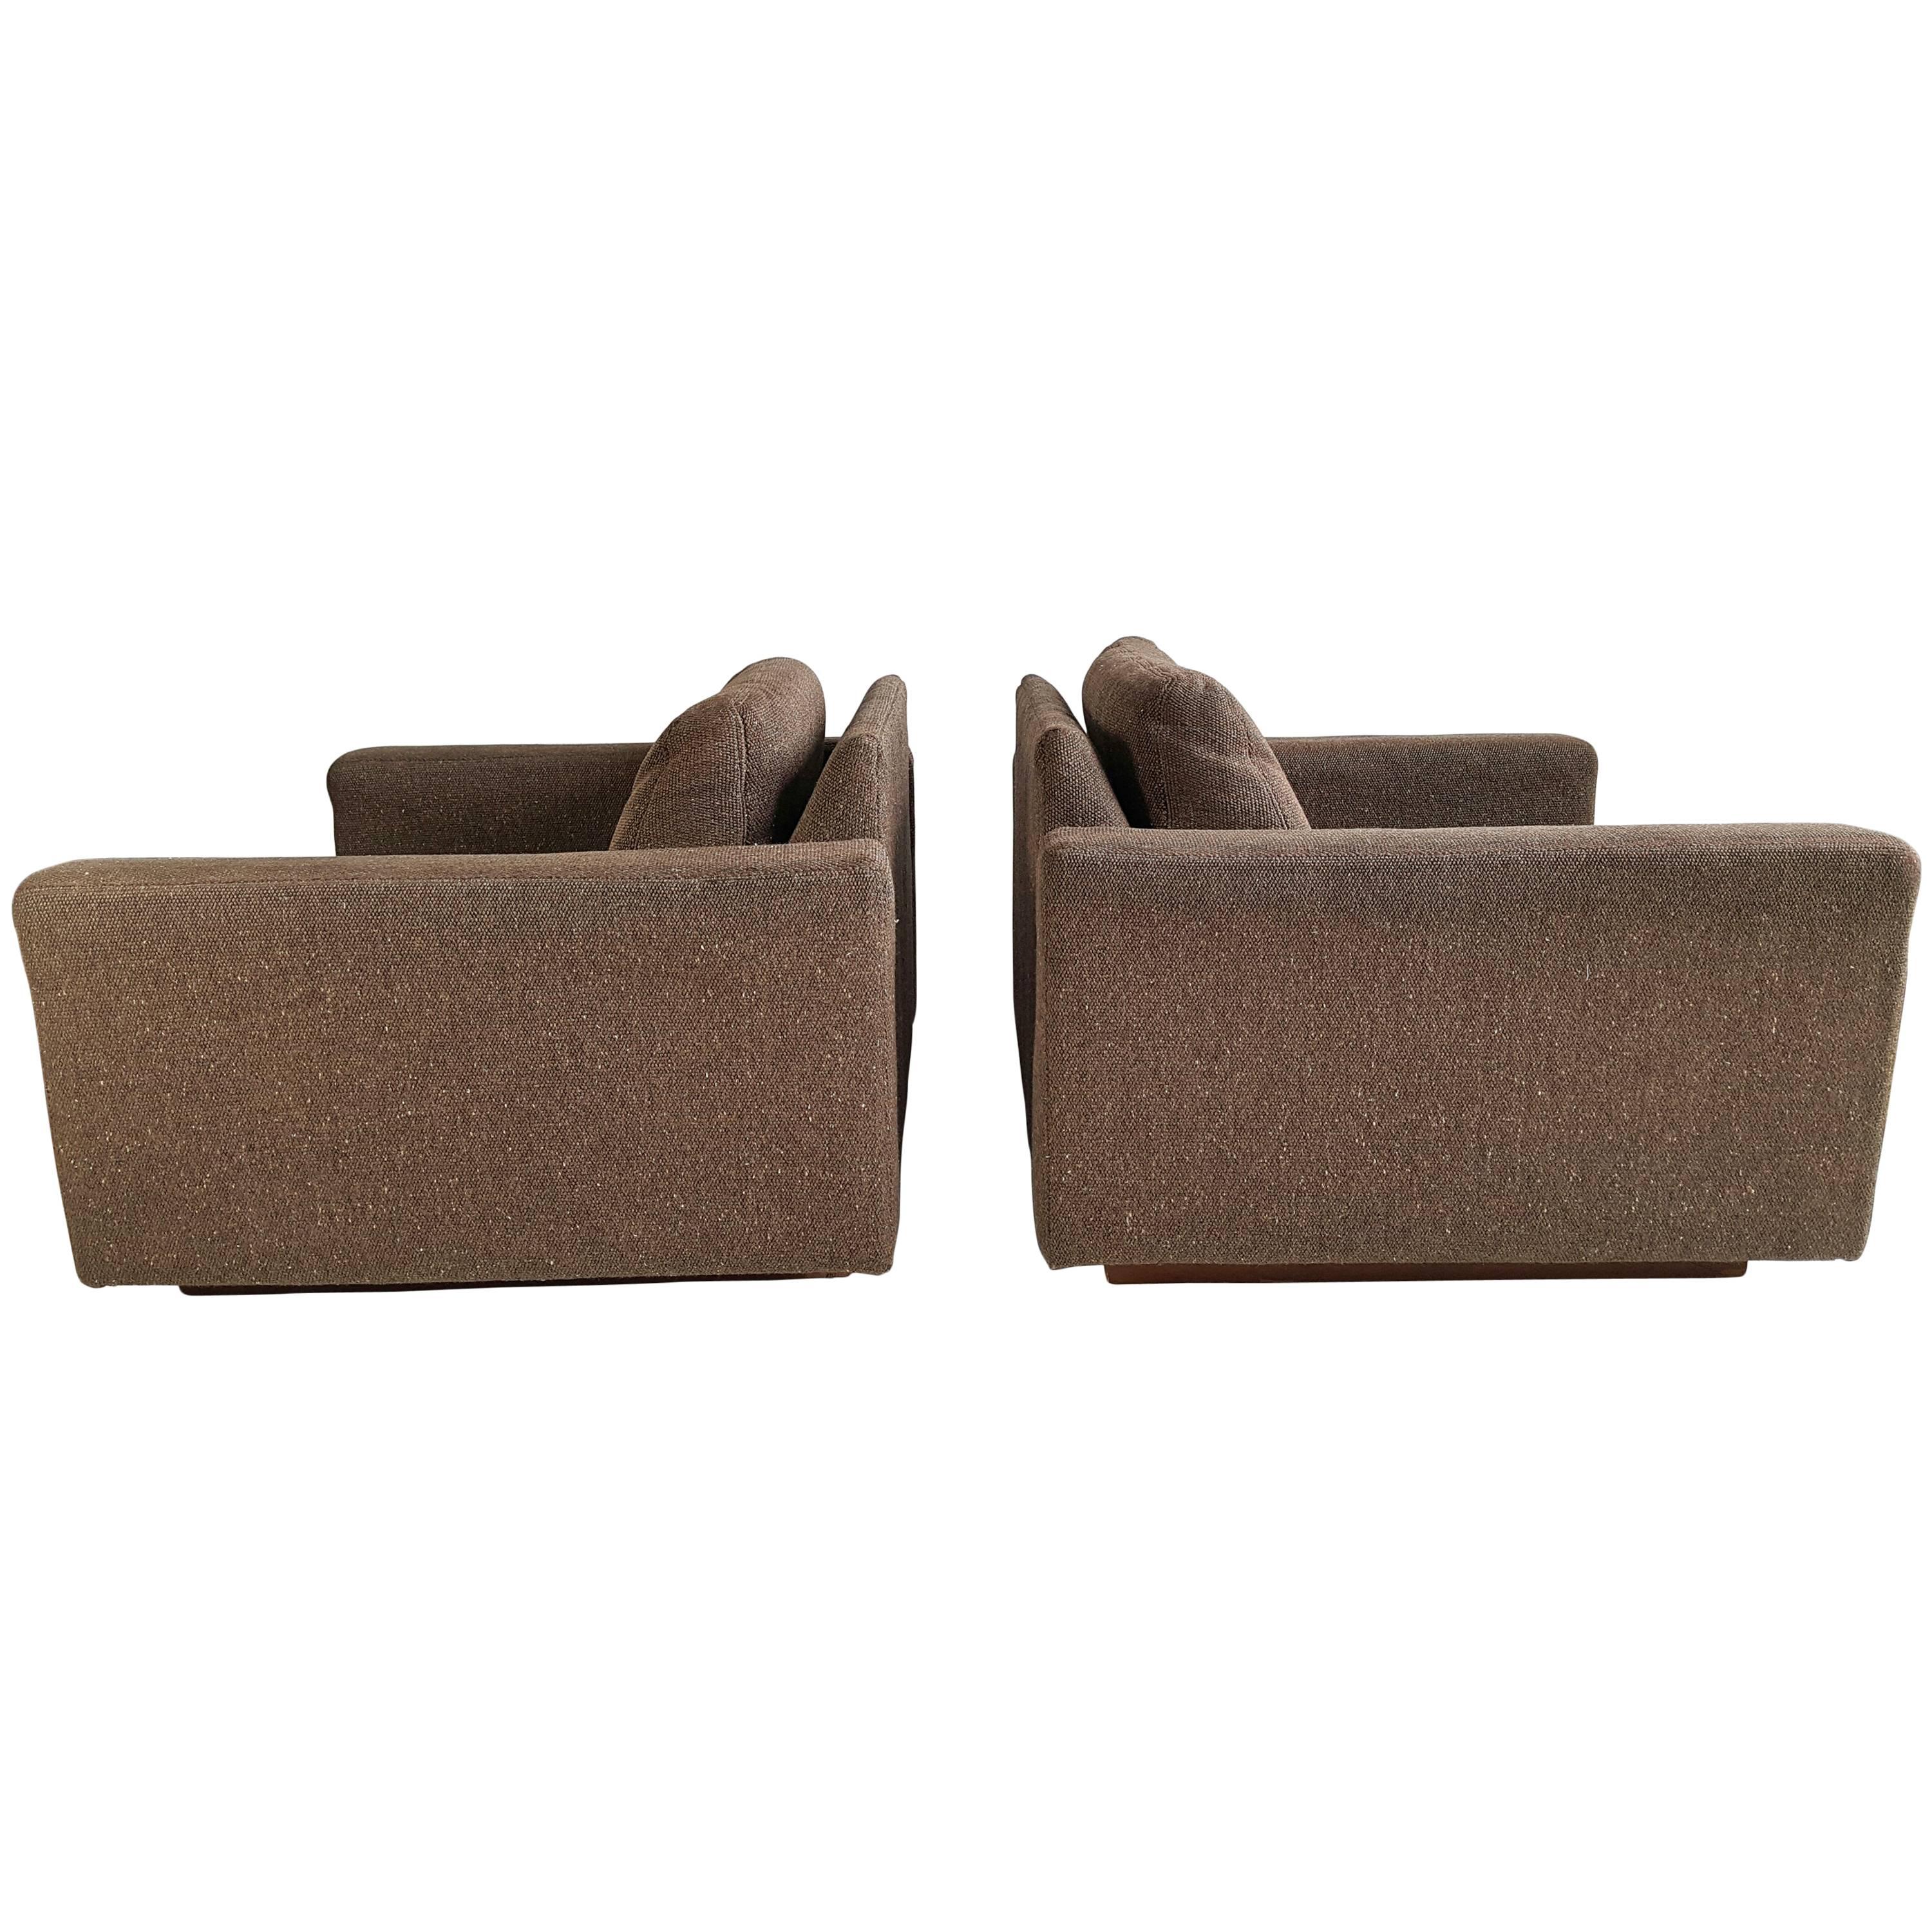 Pair of Milo Baughman for Thayer Coggin Cube Lounge Chairs